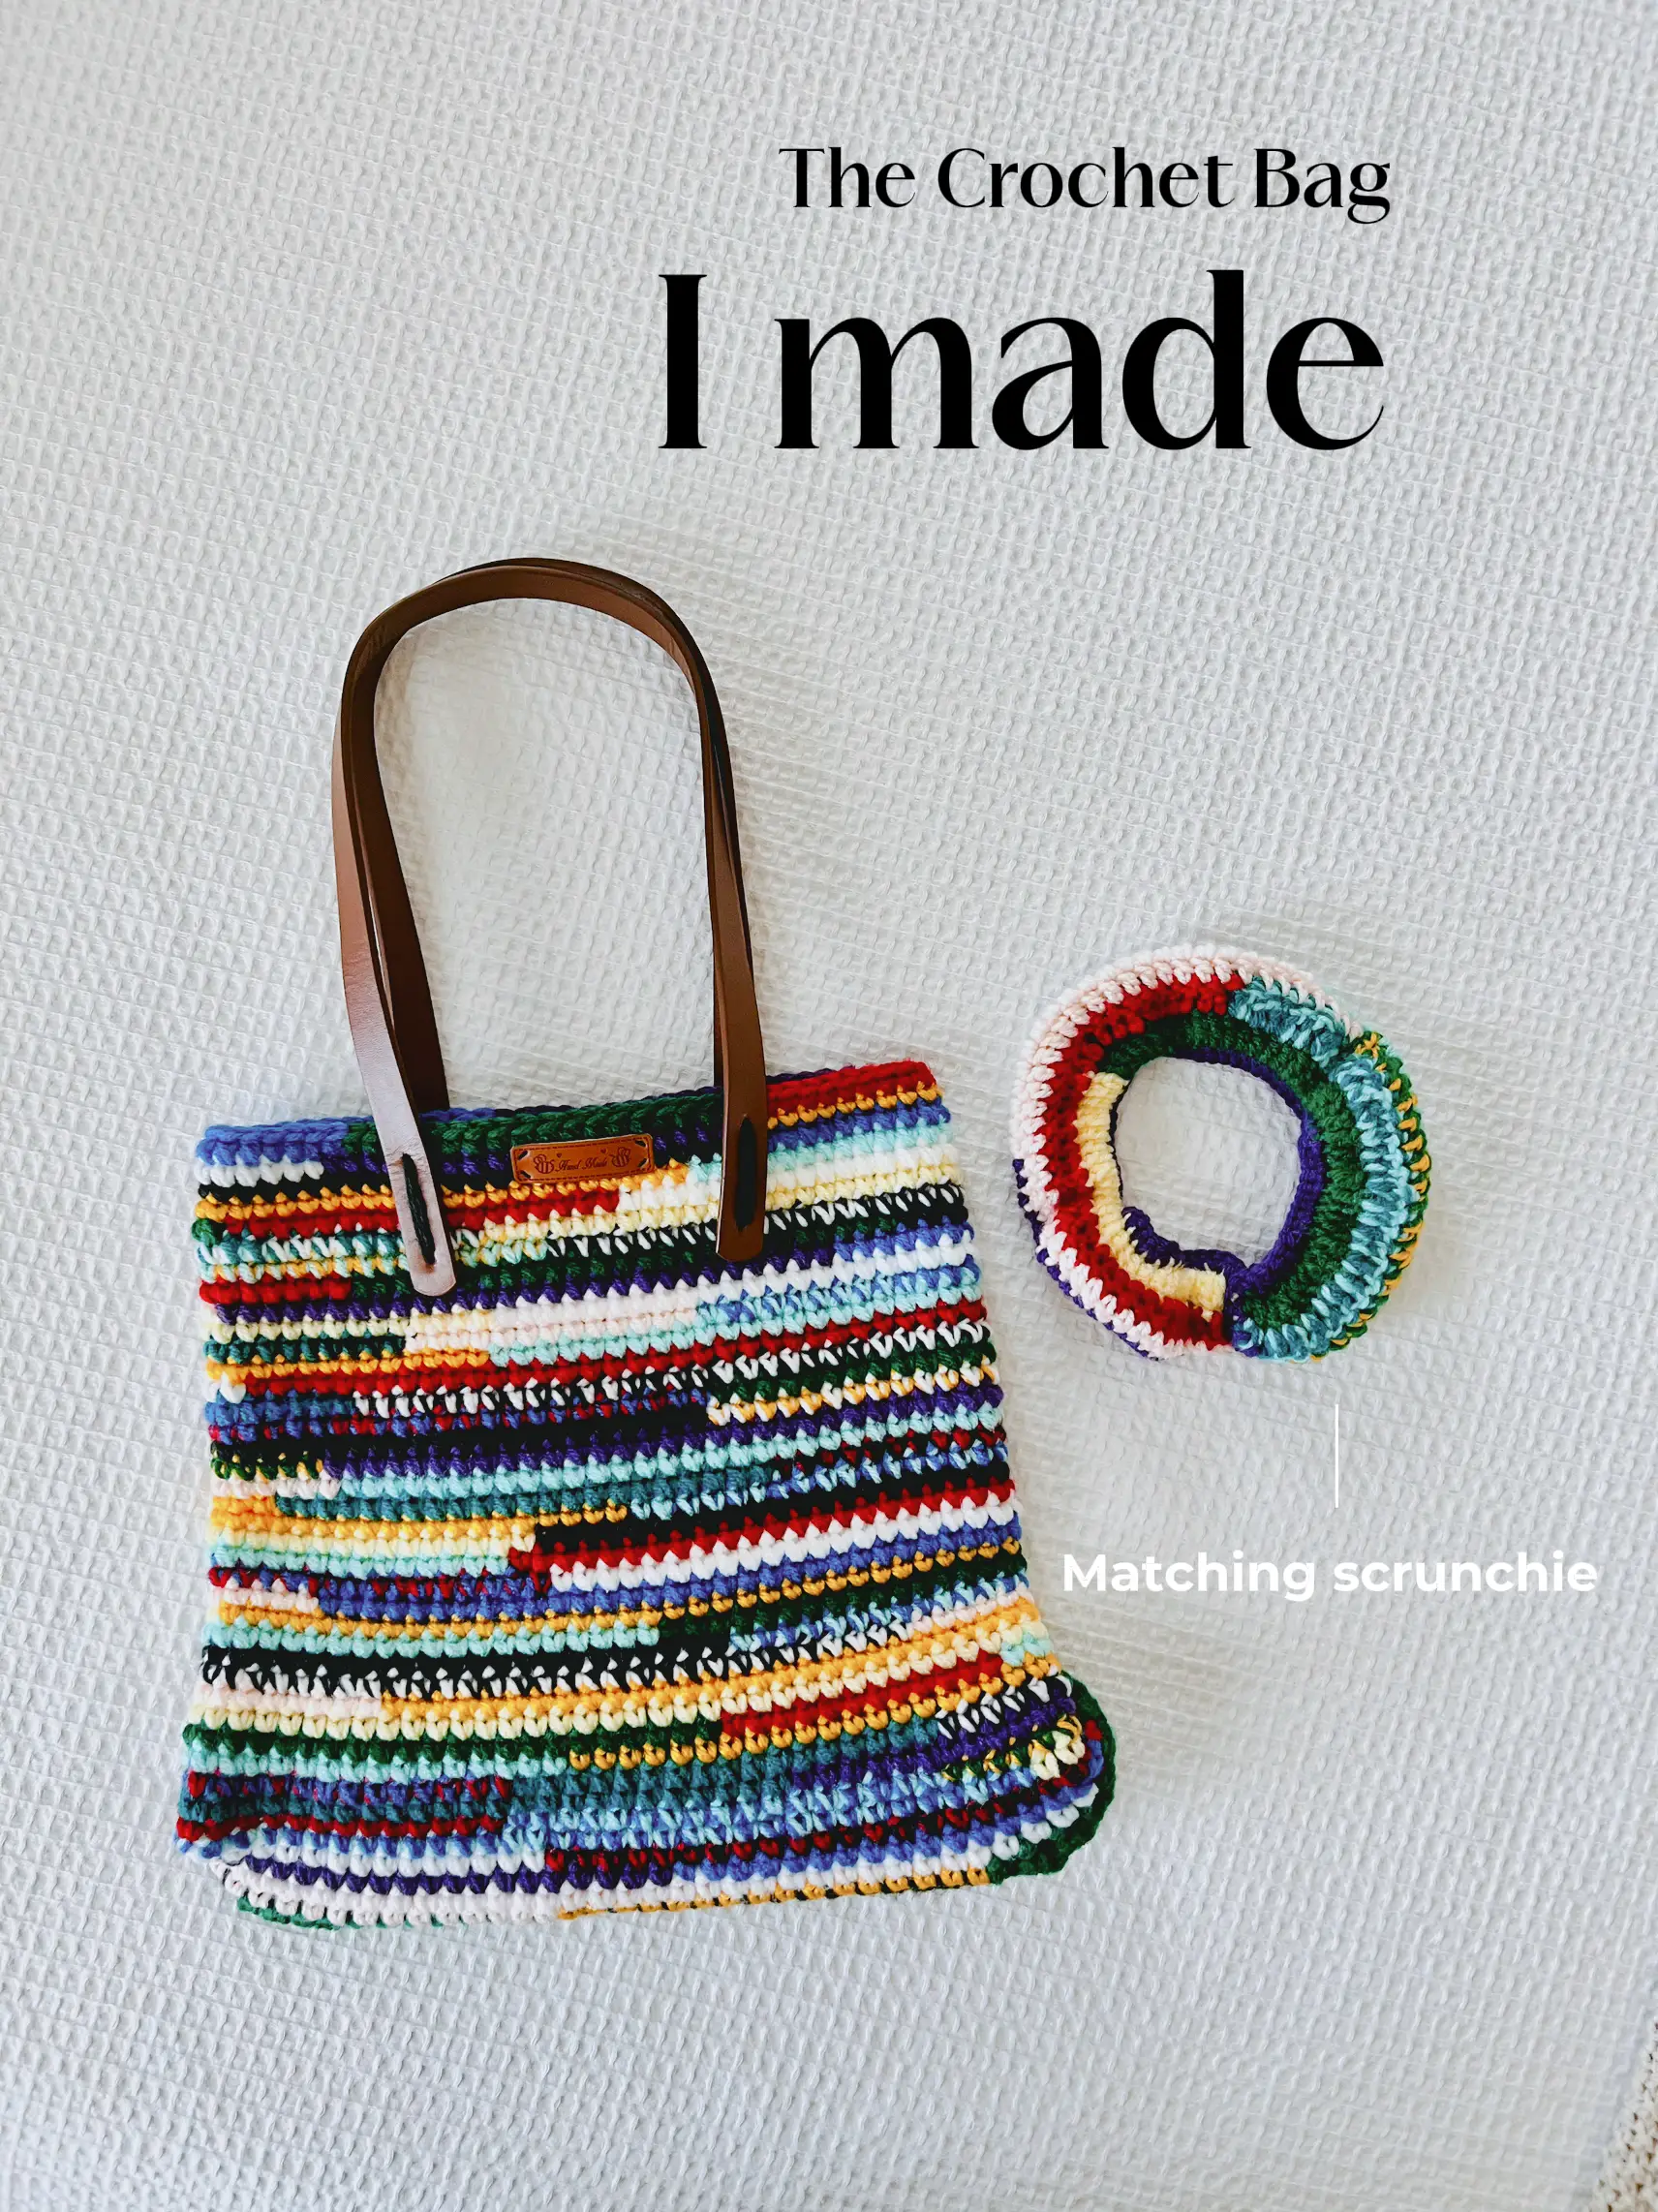 THE LATEST BAG I CROCHETED…with matching scrunchie | Gallery